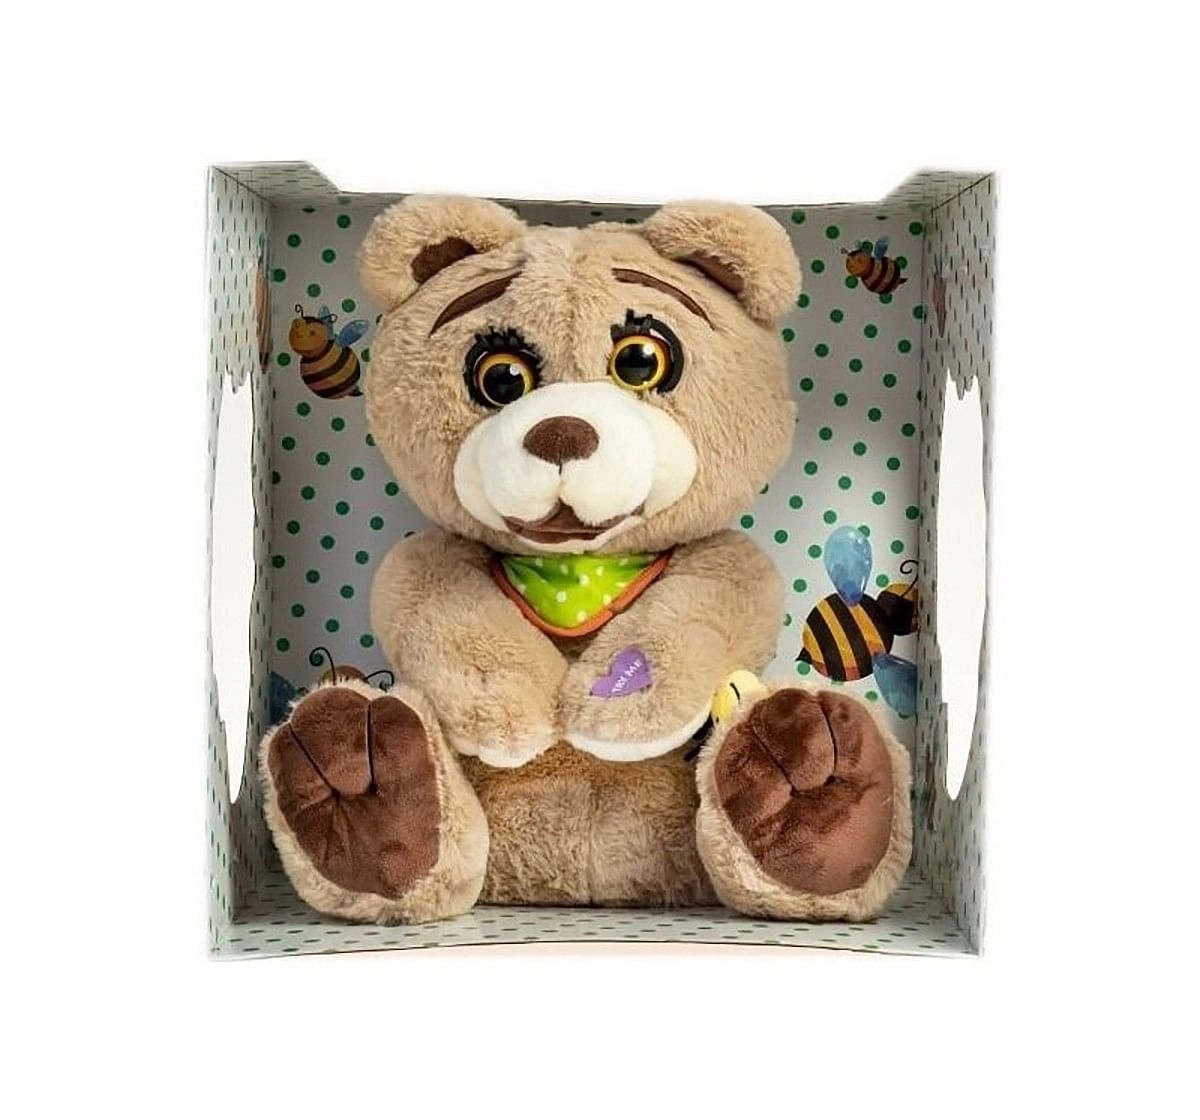 Dimian Hugo Bear Story Telling Interactive Soft Toy for Kids age 3Y+ - 42 Cm (Brown)